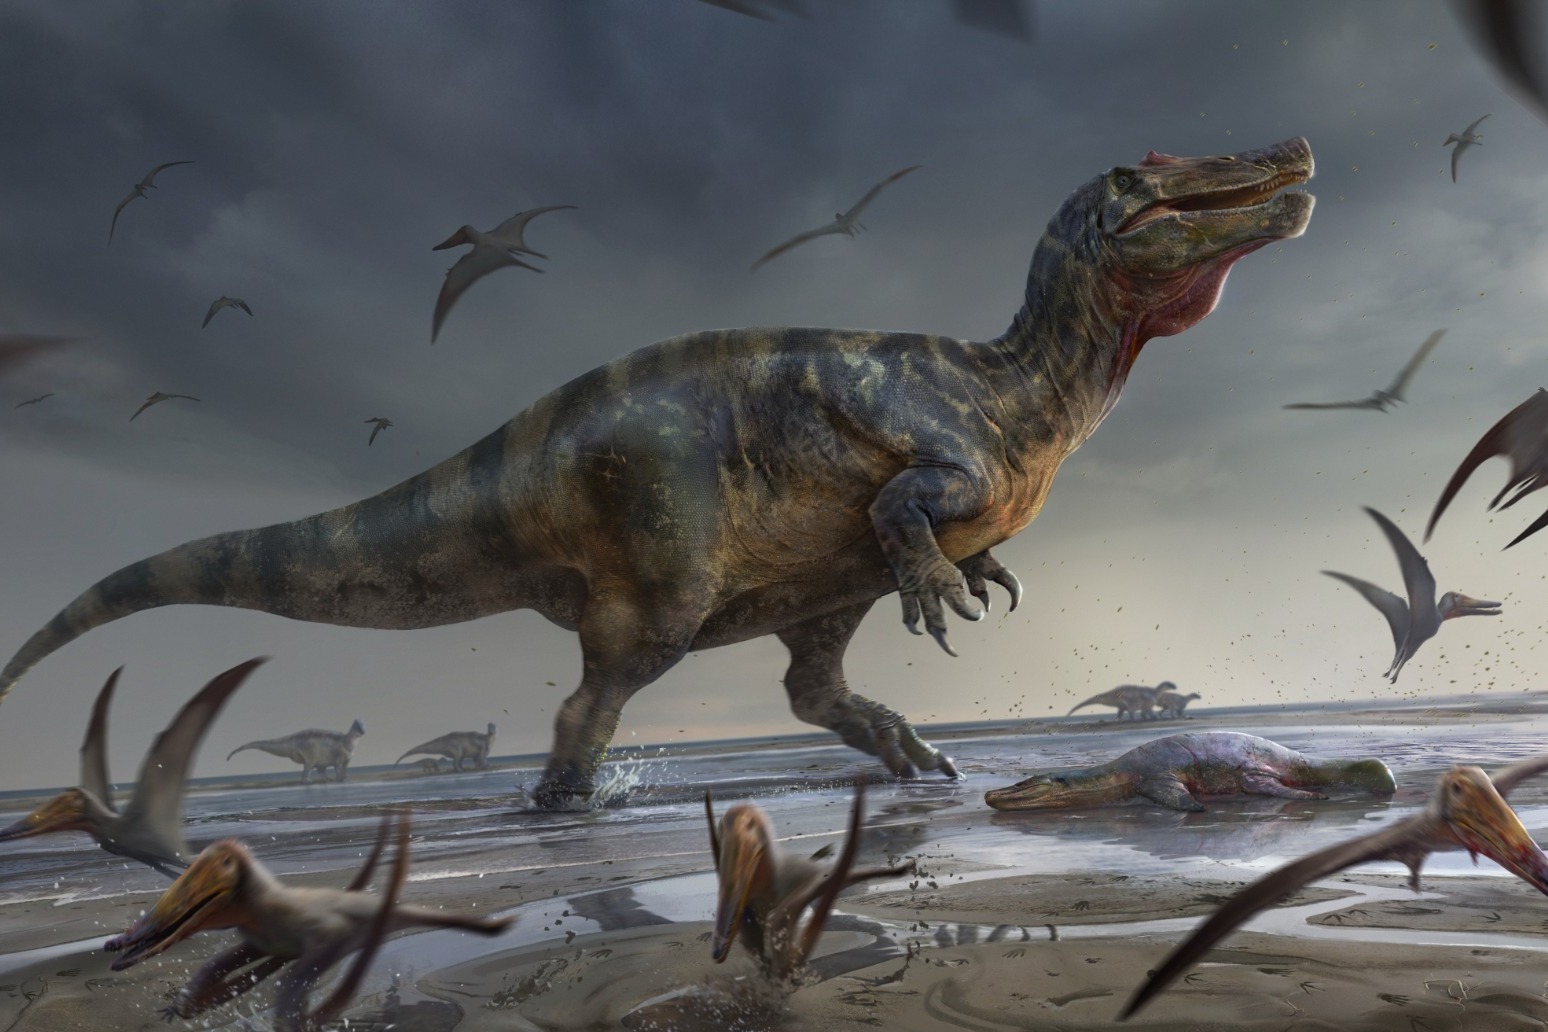 Remains of Europe’s largest ever land predator dinosaur found on Isle of Wight 